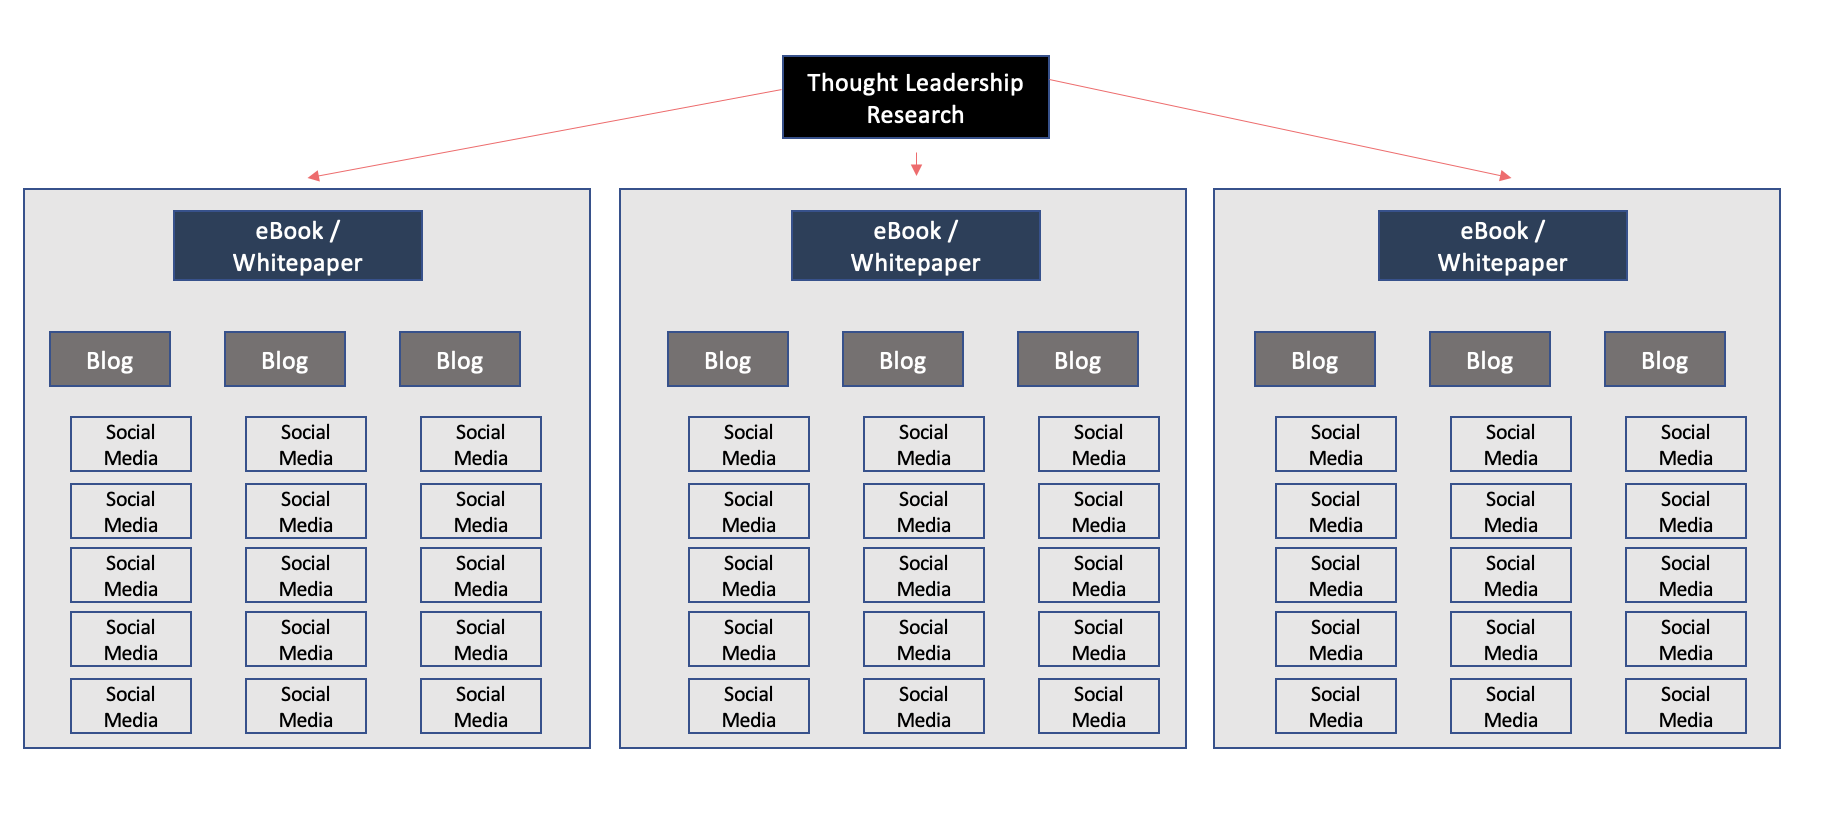 Thought Leadership Research & Content Marketing